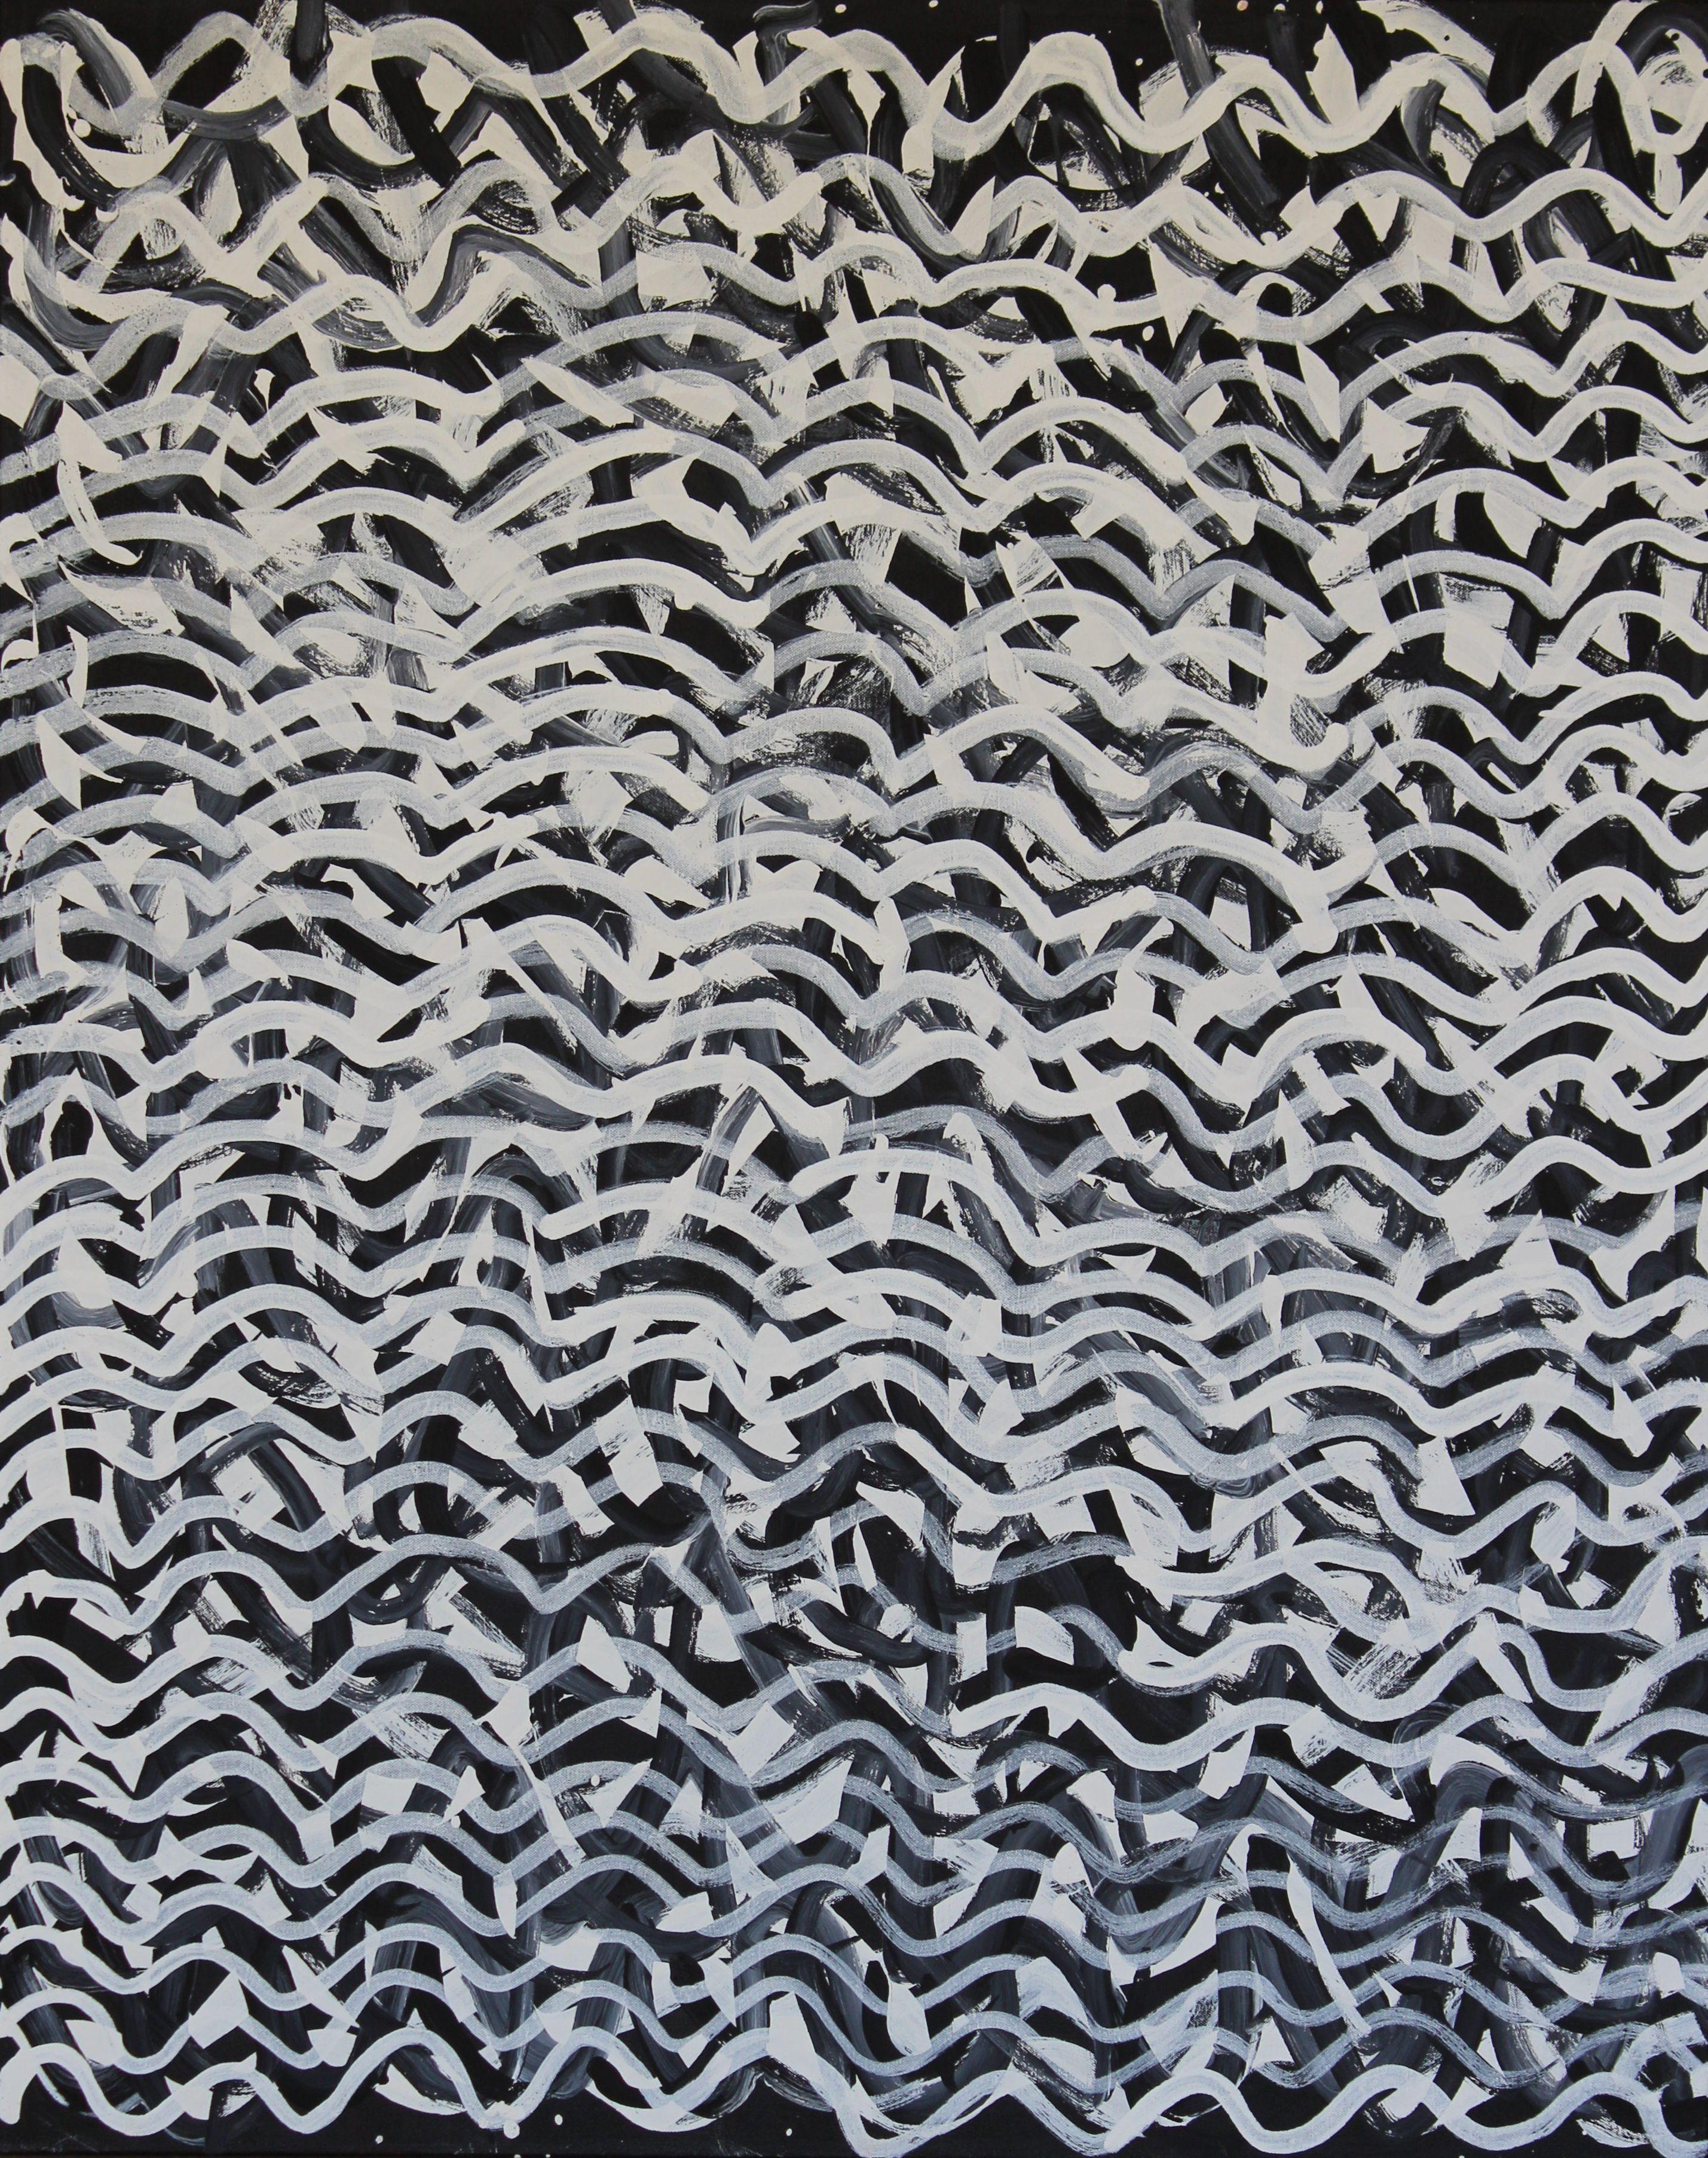 Kittey Malarvie Landscape Painting - Milkwater. Black and white abstract Aboriginal painting about water. Ocher.